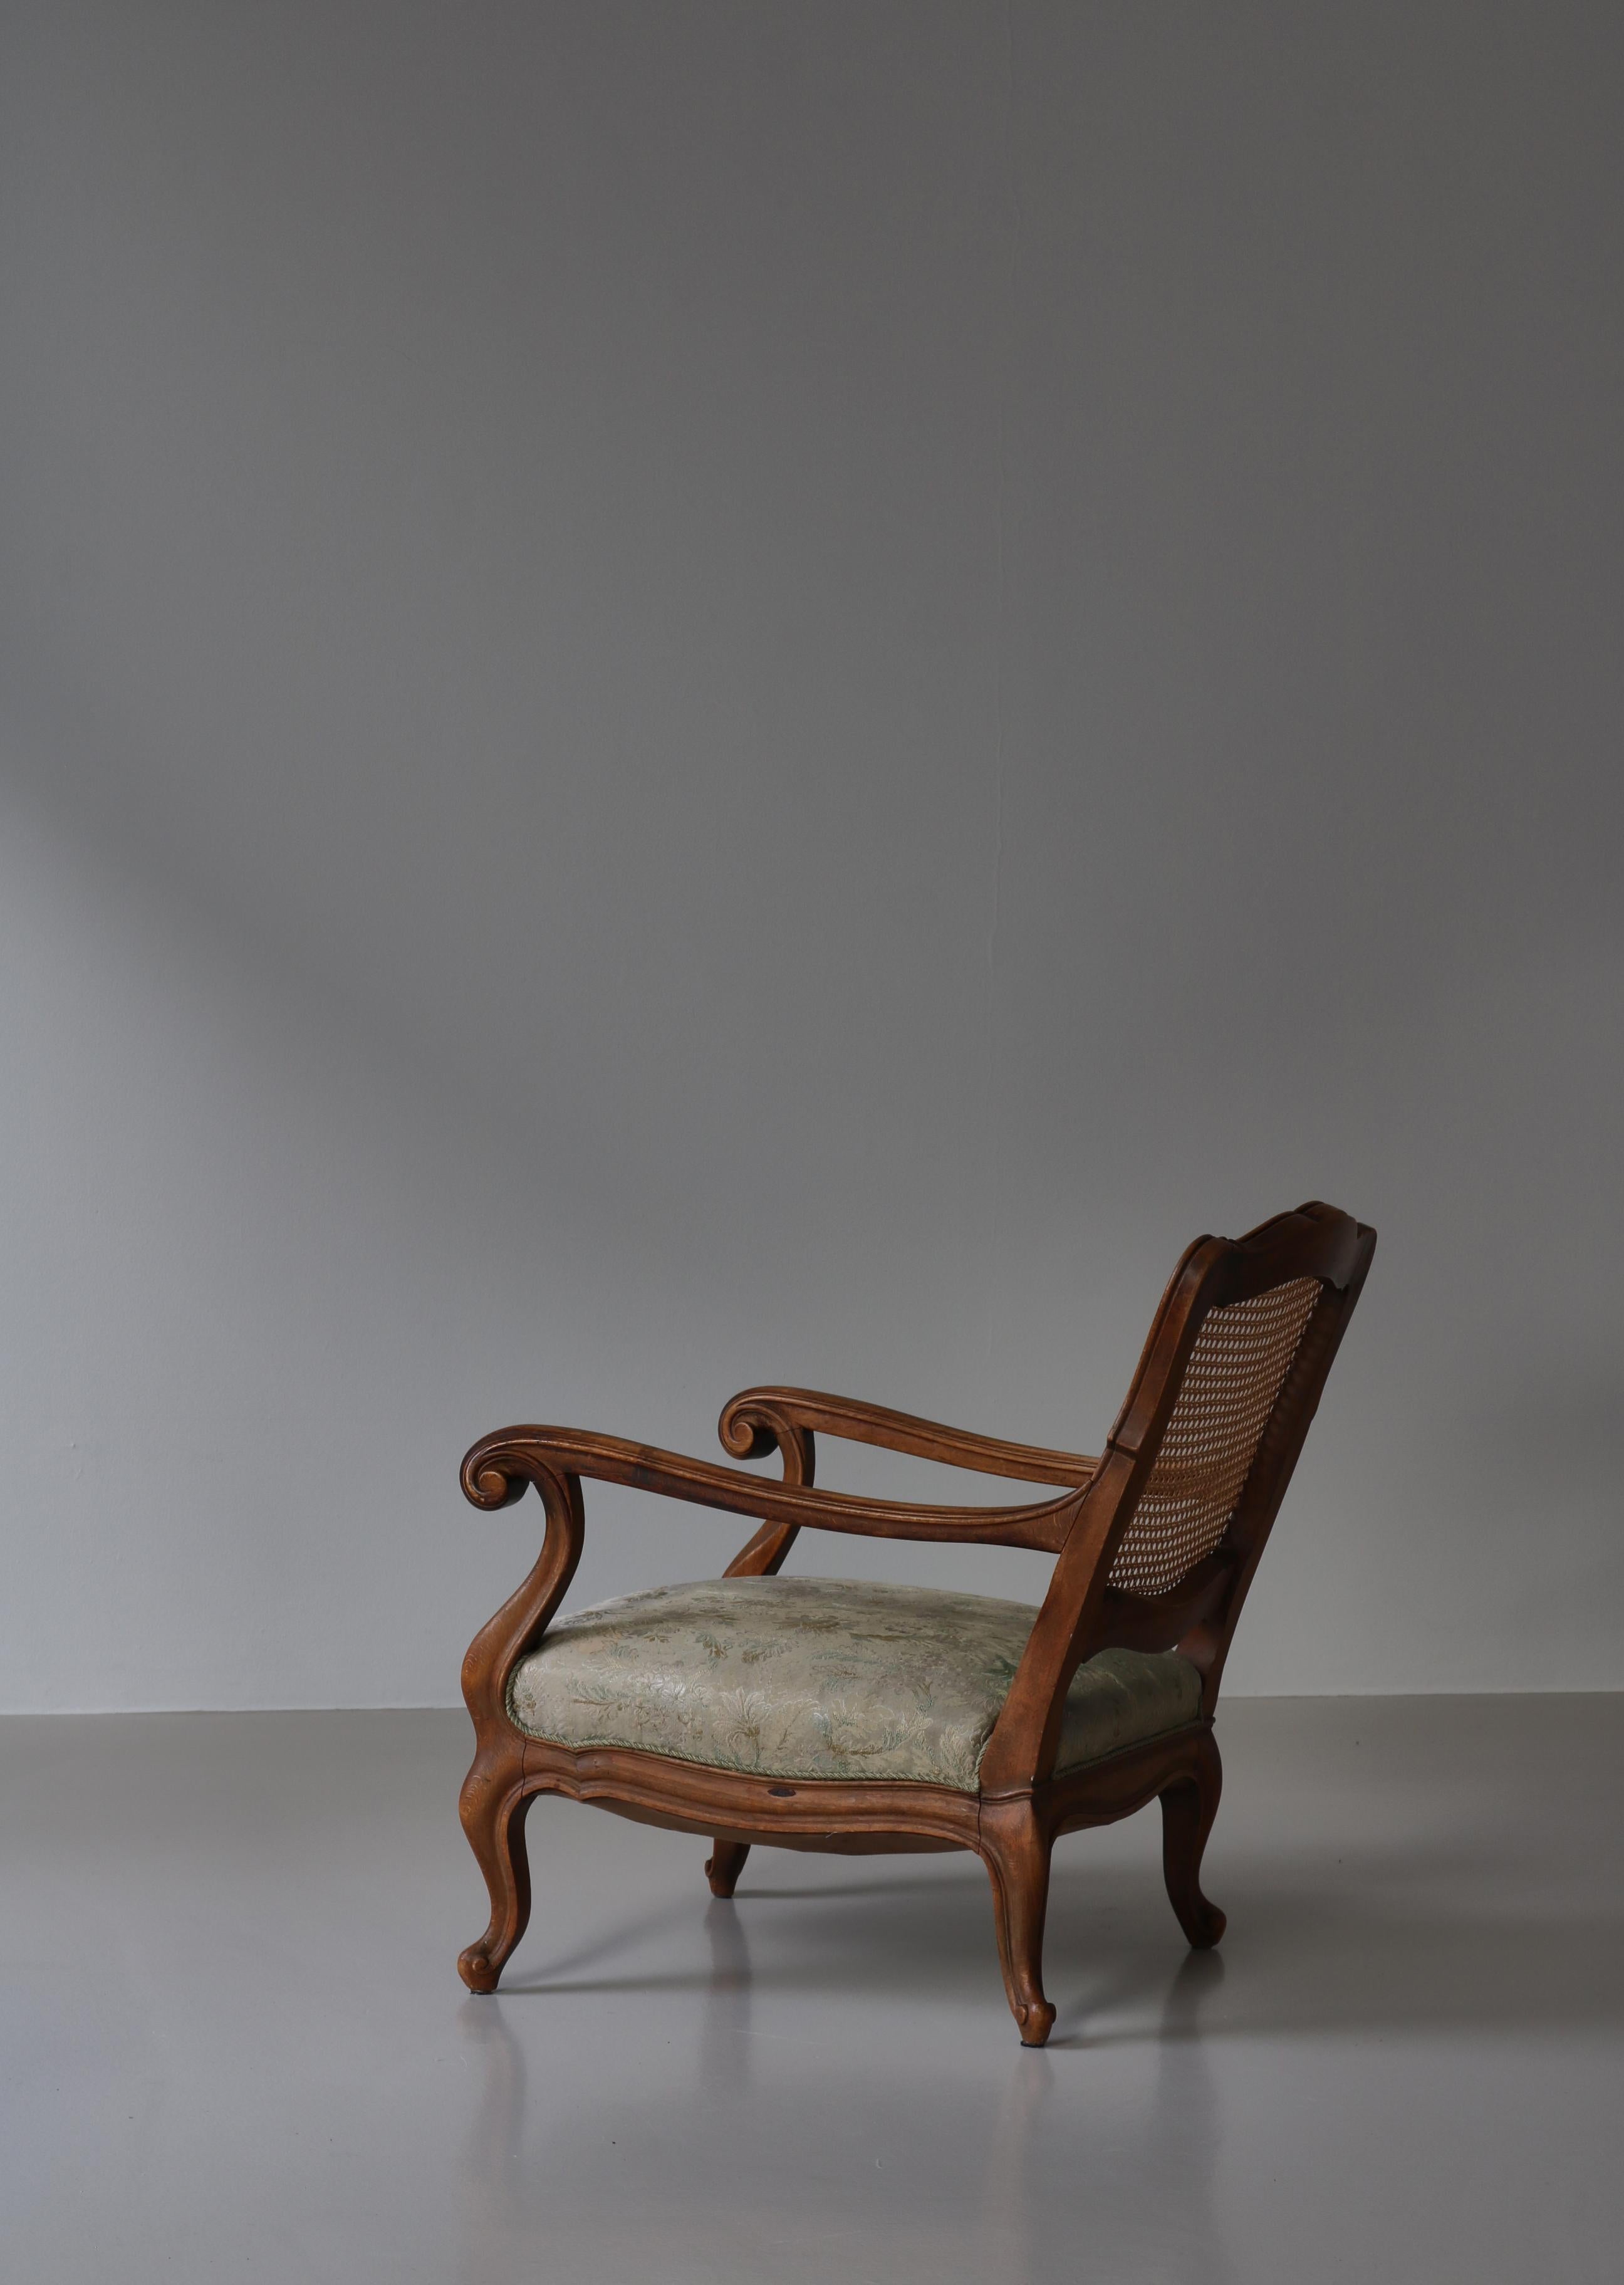 Bergére Chair Rococo Revival by Danish Cabinetmaker, Early 20th Century For Sale 8